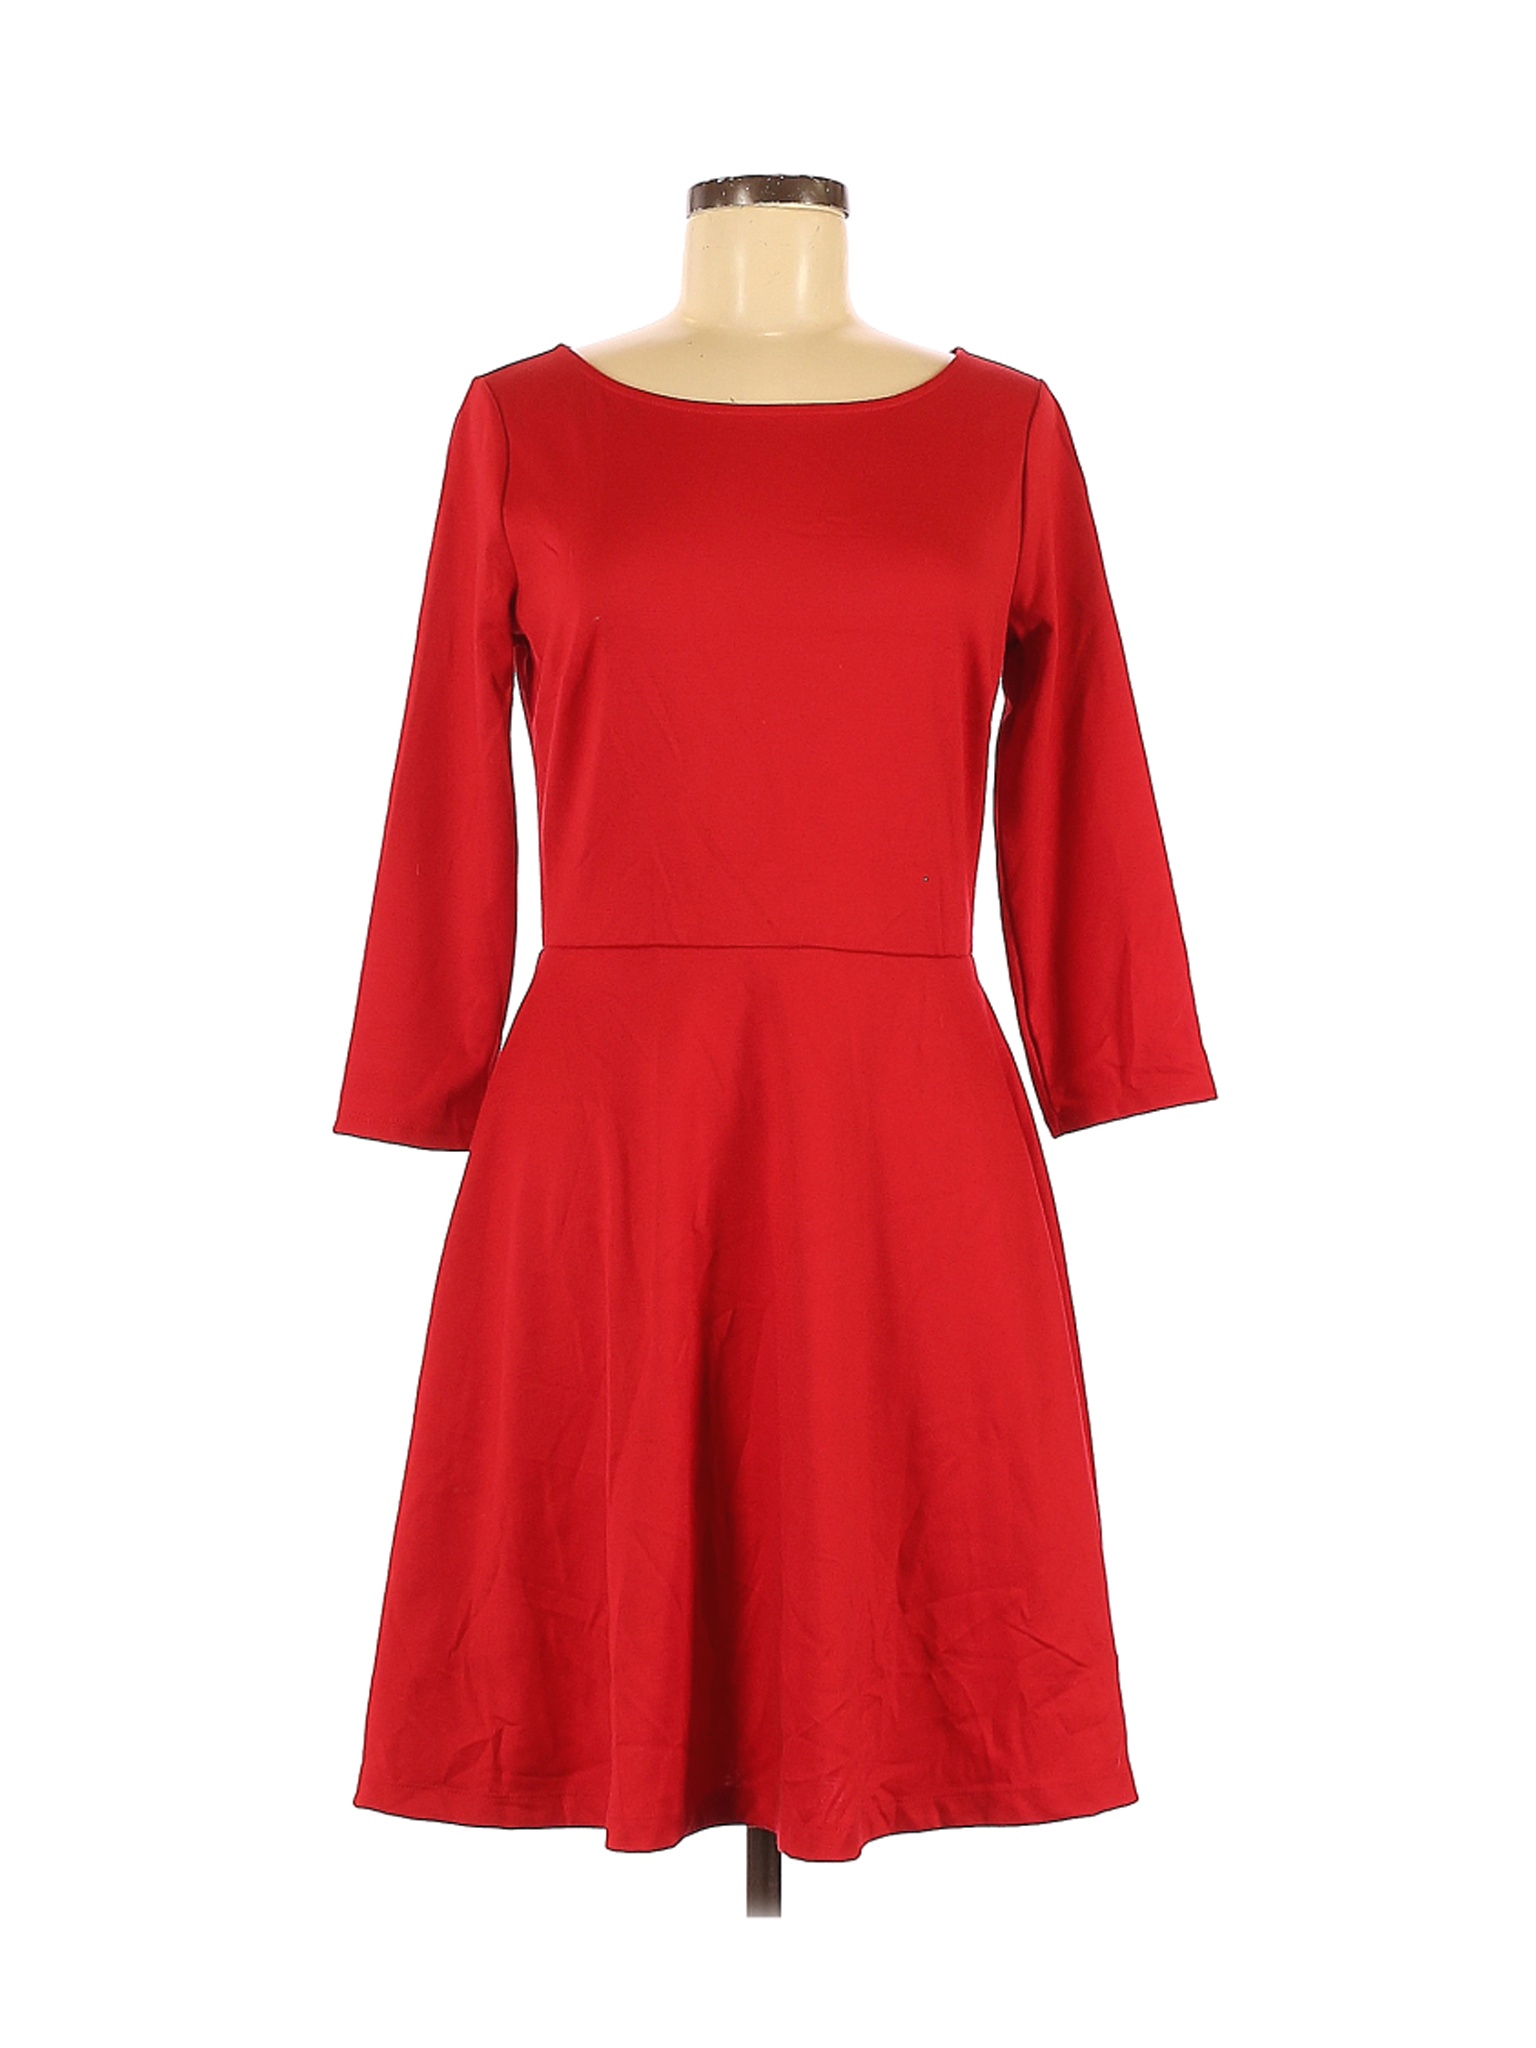 The Limited Women Red Casual Dress M | eBay